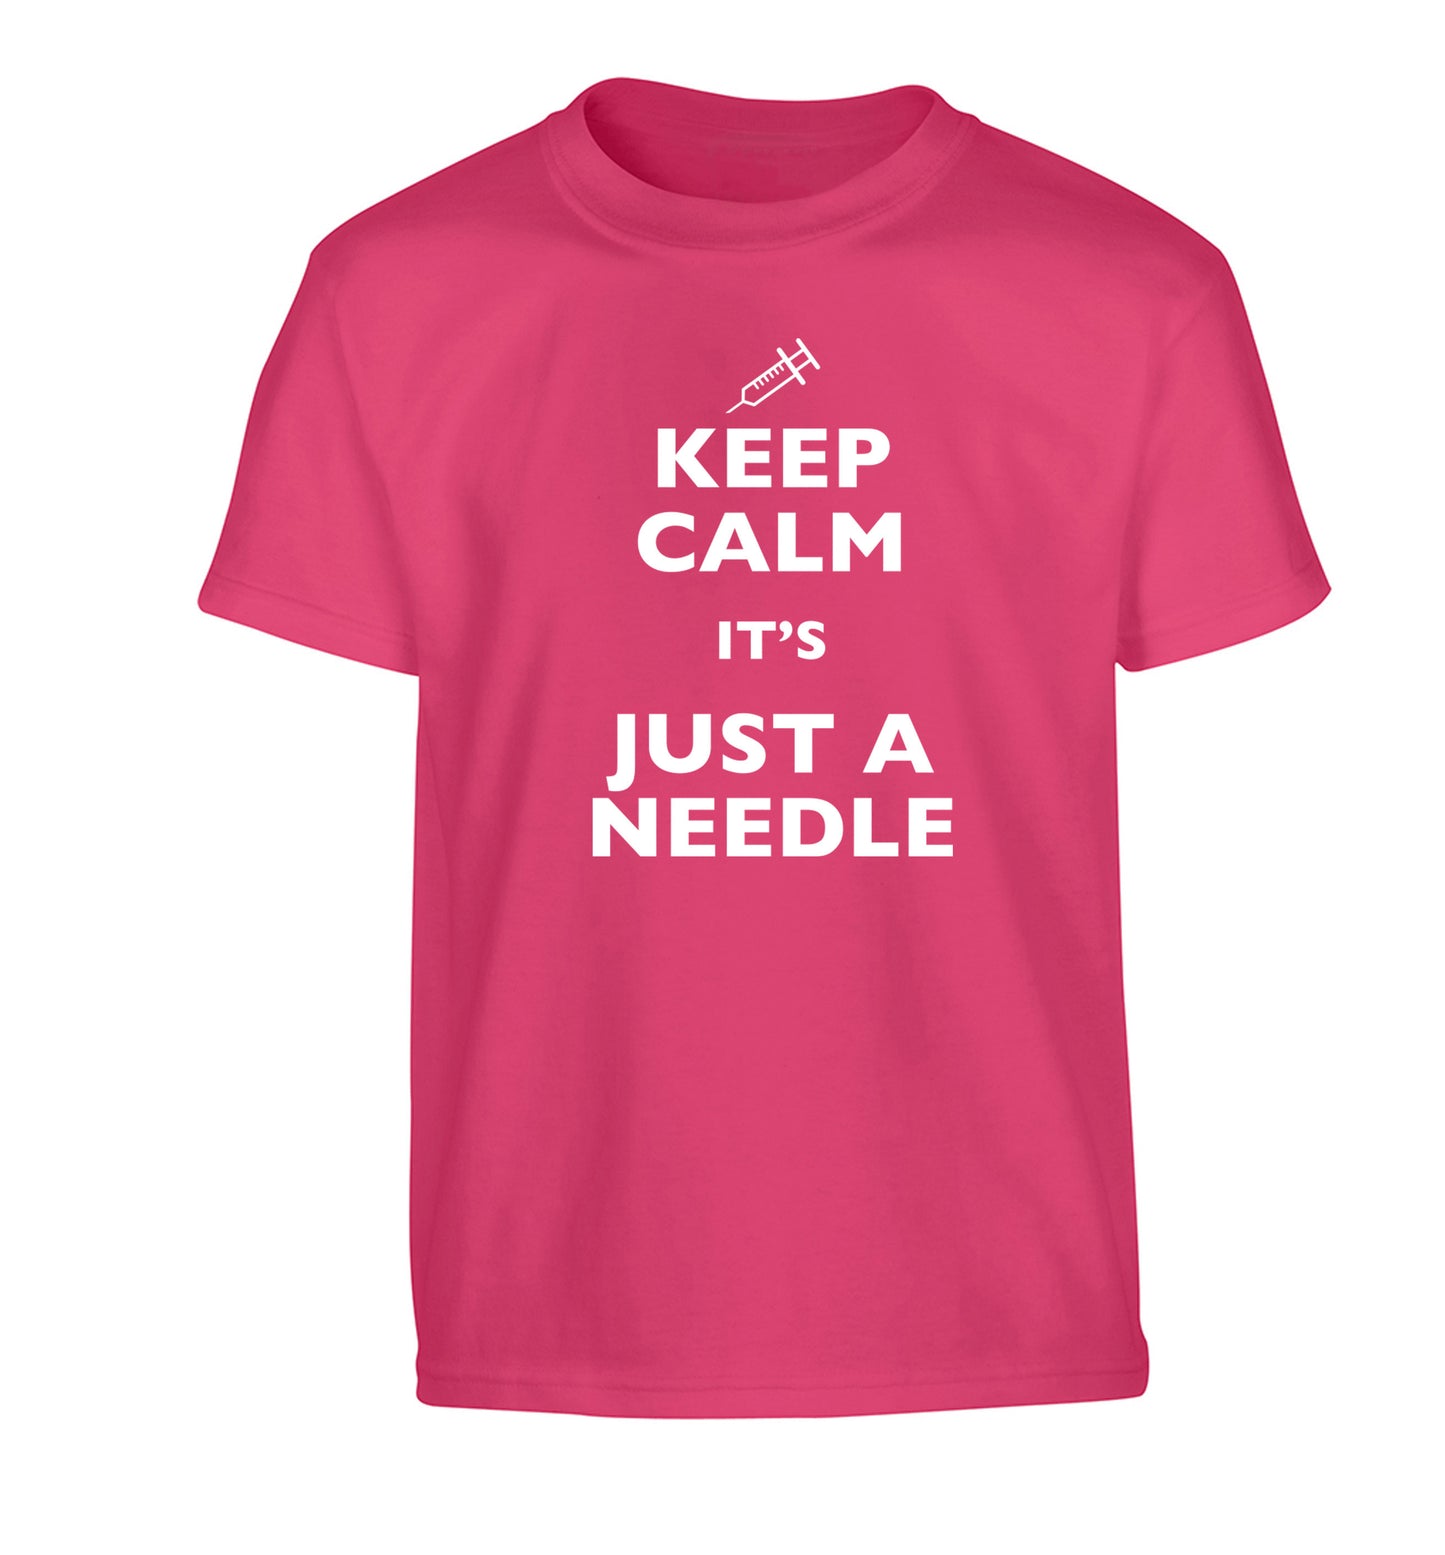 Keep calm it's only a needle Children's pink Tshirt 12-14 Years